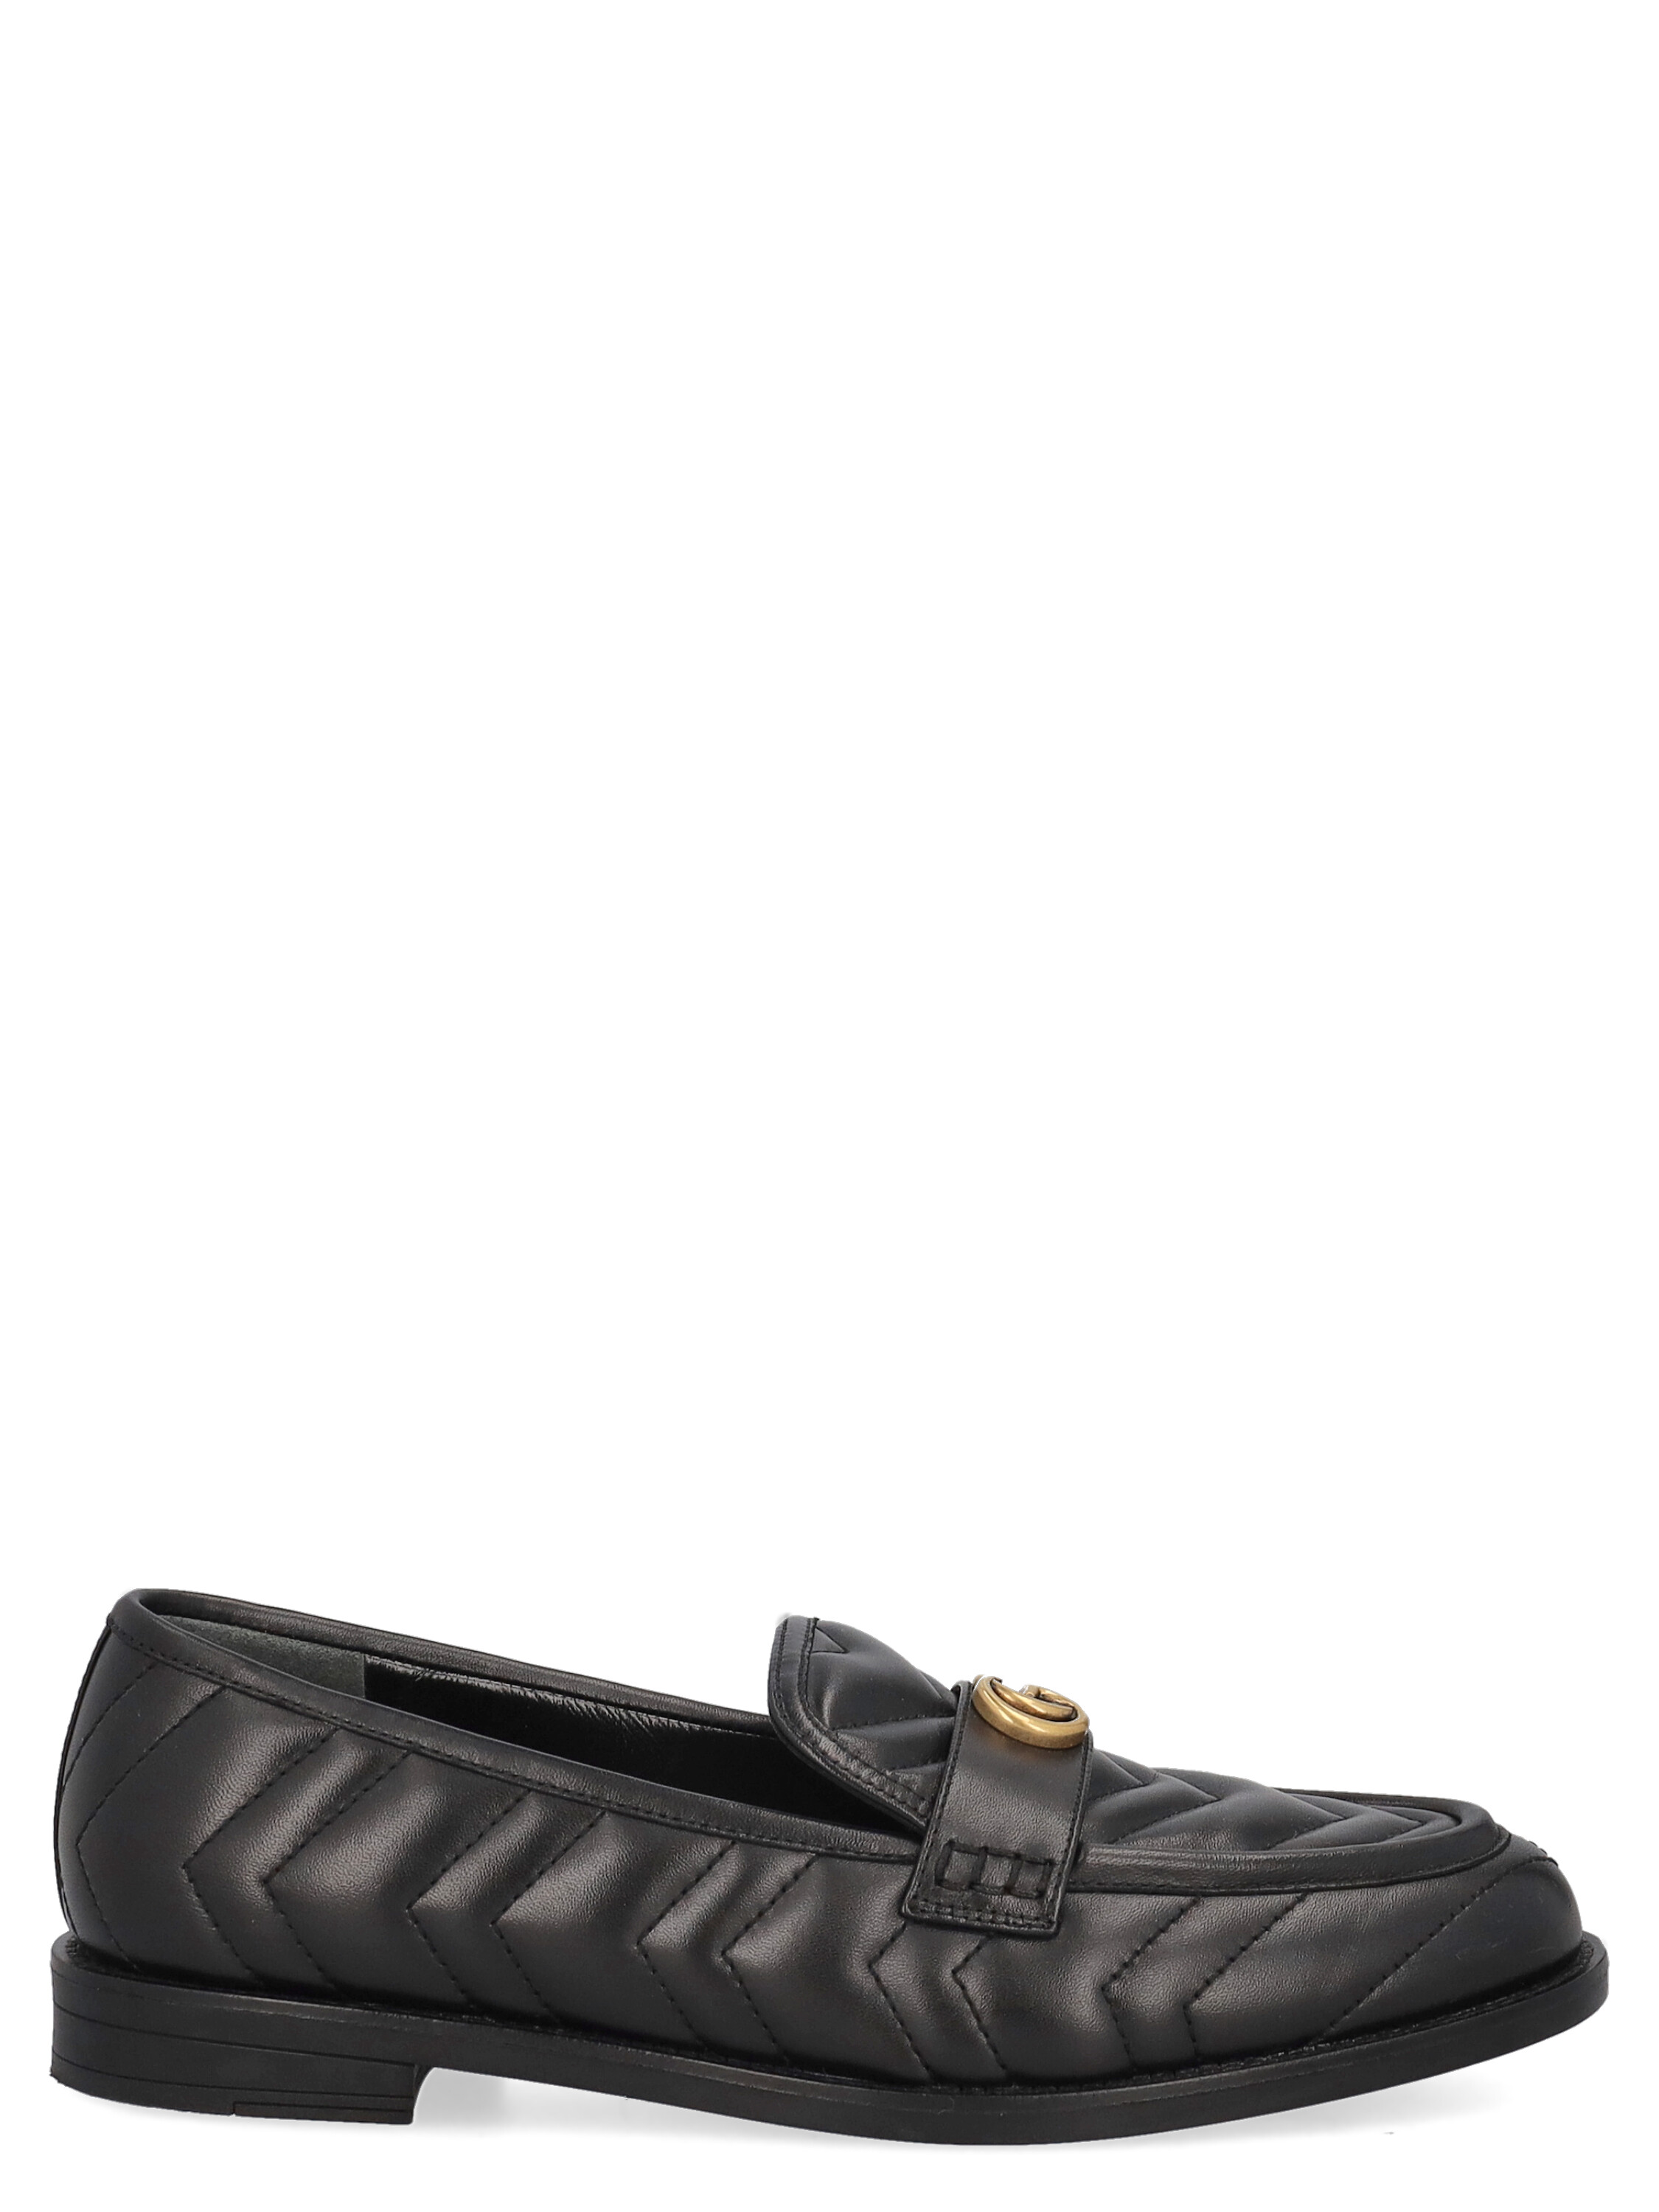 Pre-owned Gucci Women's Loafers -  - In Black Leather